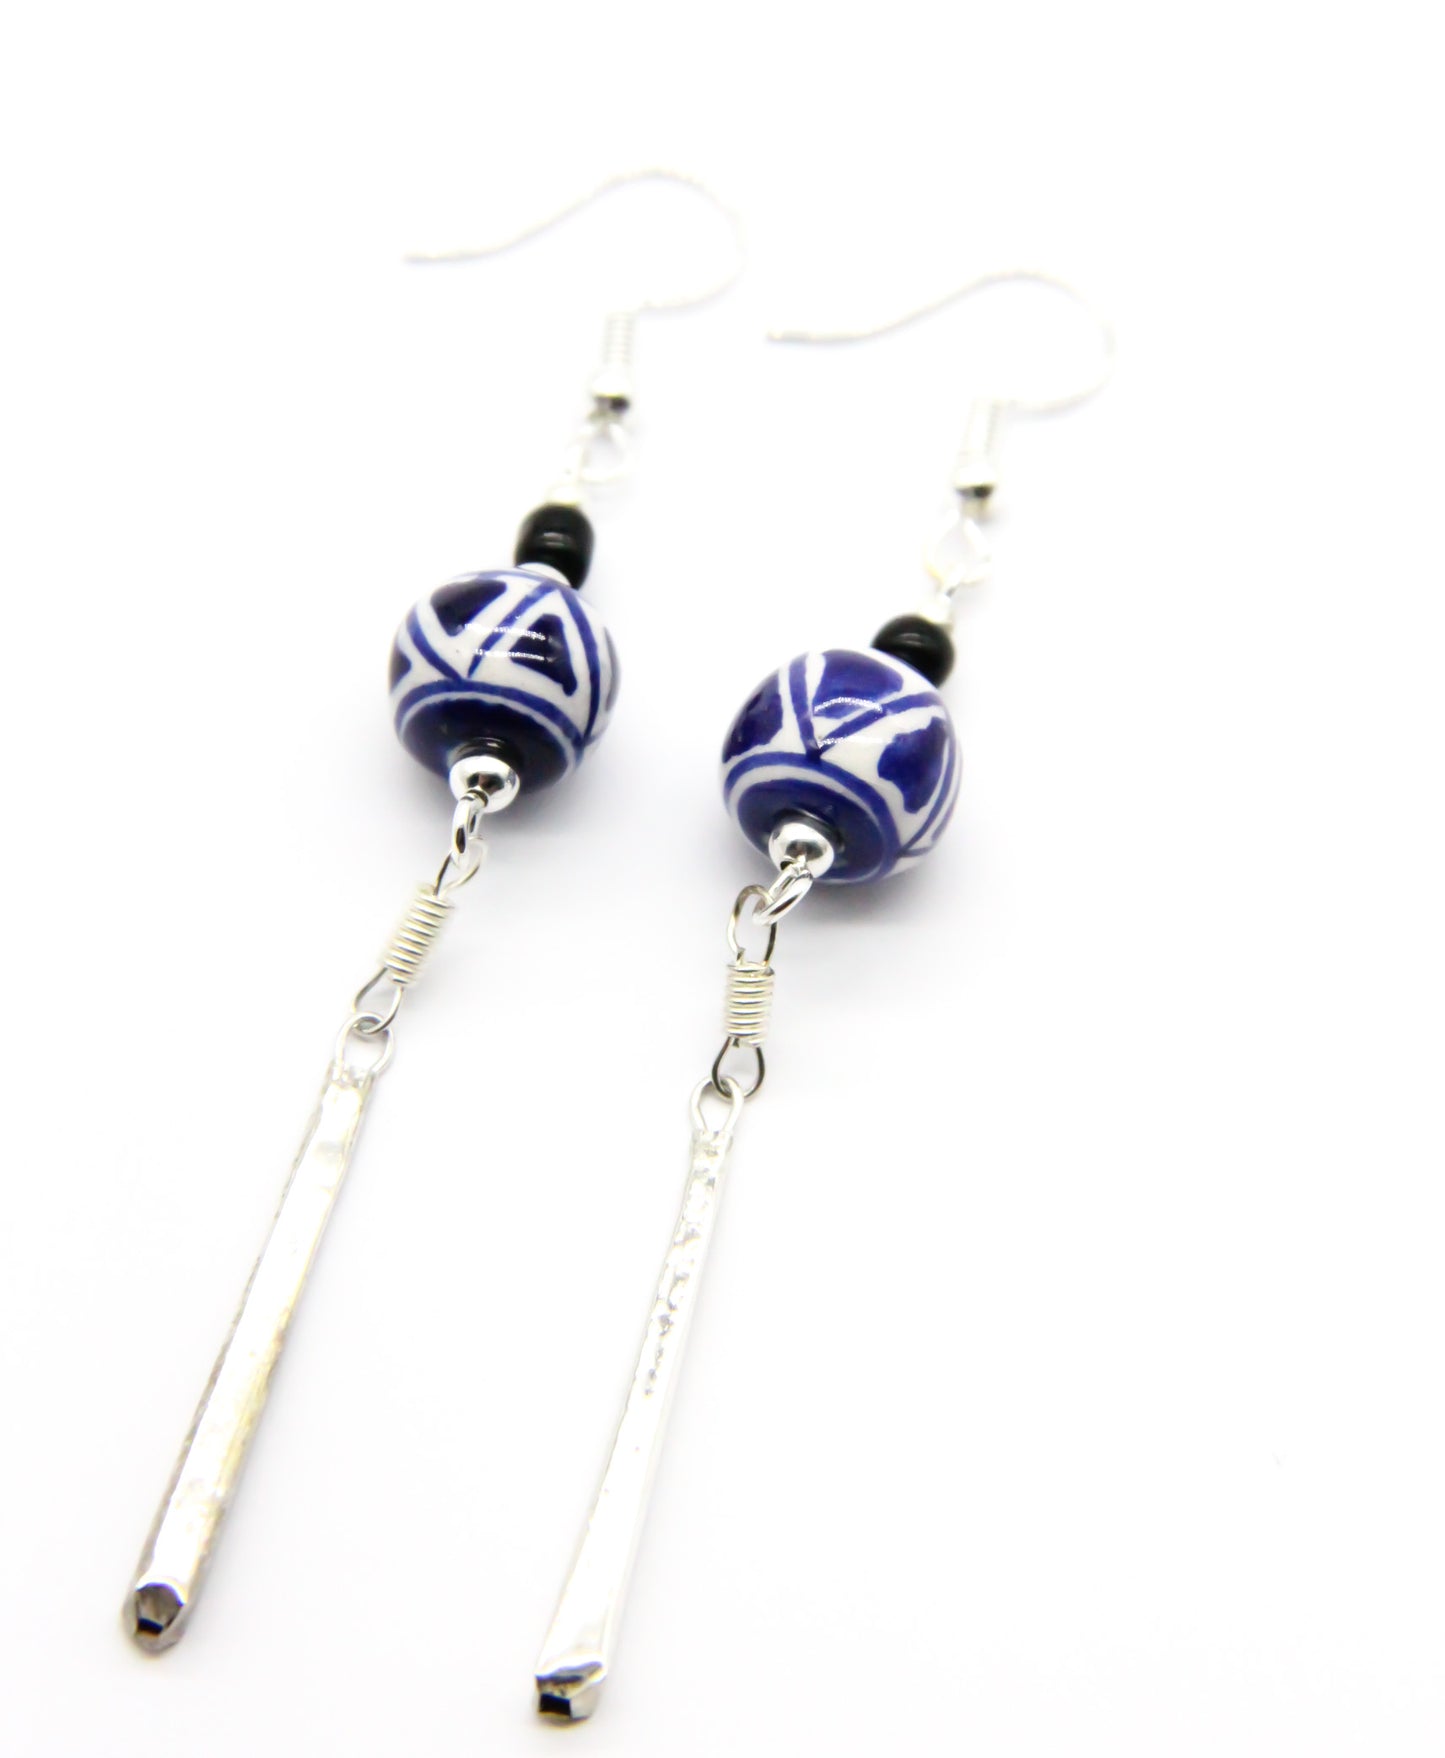 Silver drop earrings with blue and white ceramic beads